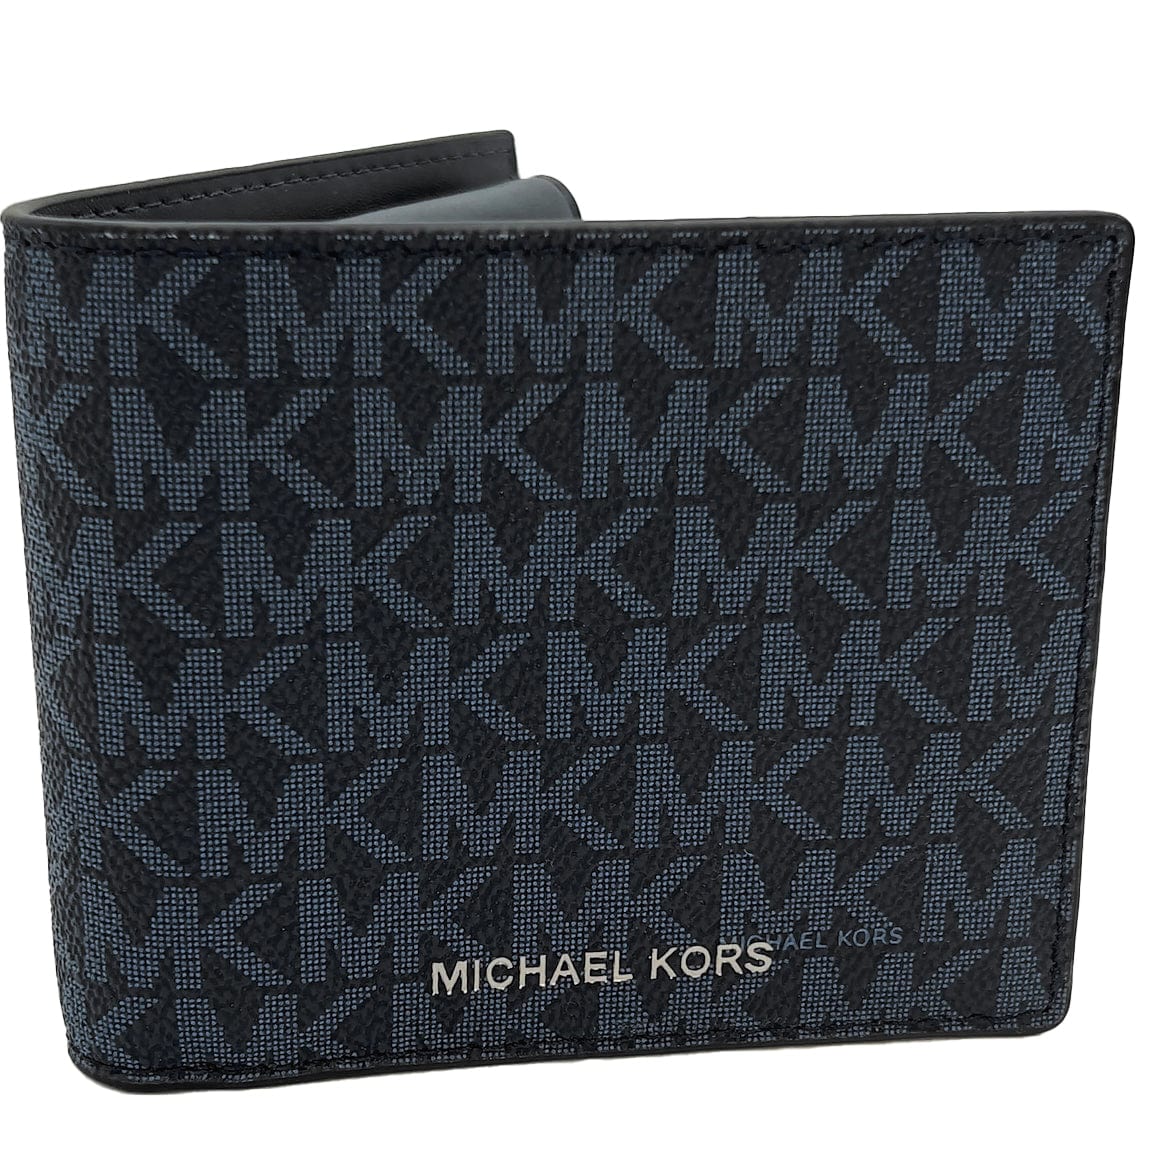 MICHAEL KORS: Michael wallet in grained leather - Black | MICHAEL KORS  wallet 34F9GJ6F2L online at GIGLIO.COM